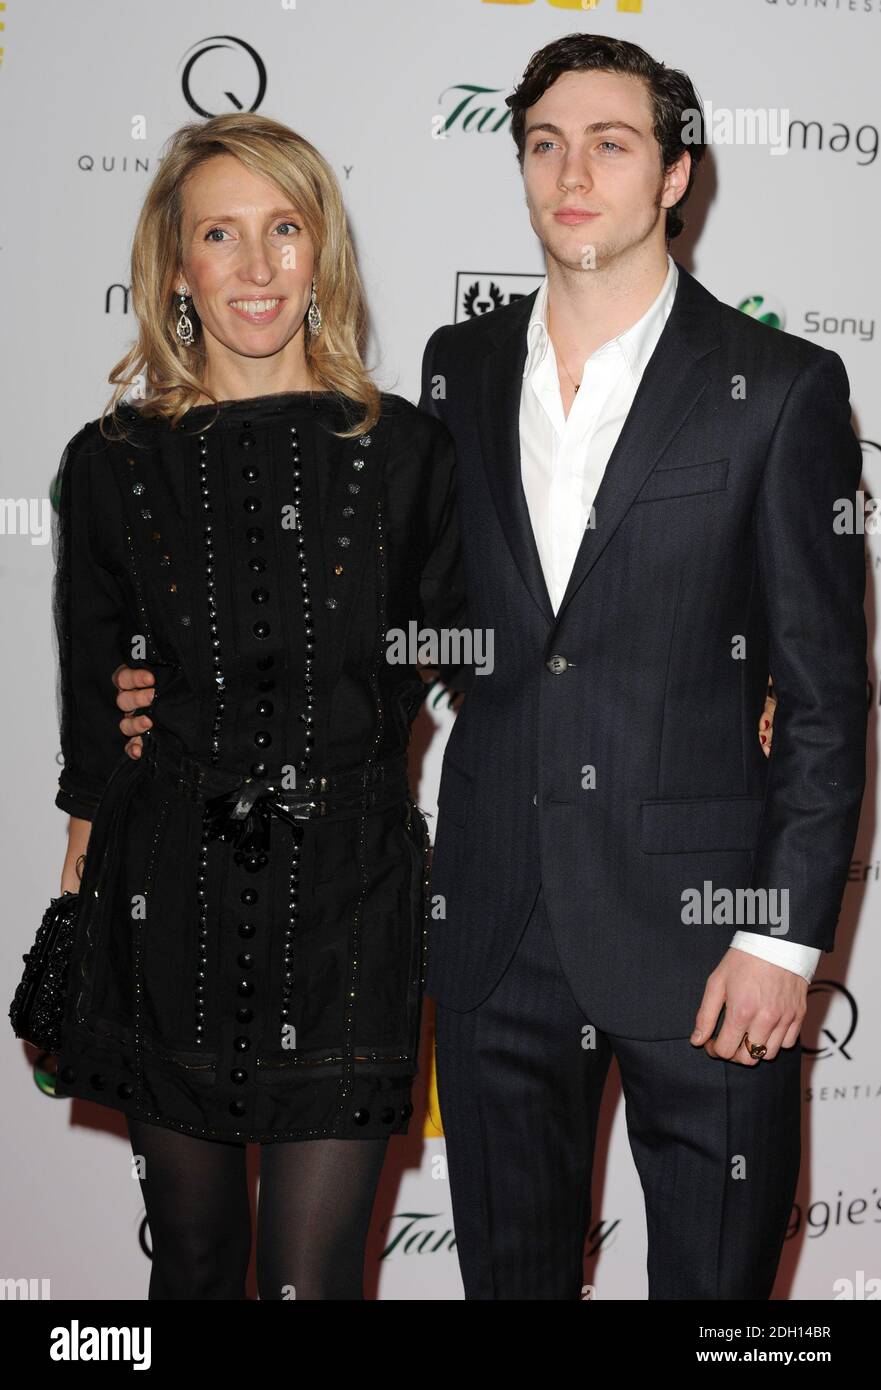 Sam Taylor- Wood and fiance Aaron Taylor-Johnson arrive for the charity premiere of Nowhere Boy, hosted by Quintessentially,, at BAFTA in Piccadilly, London. Stock Photo